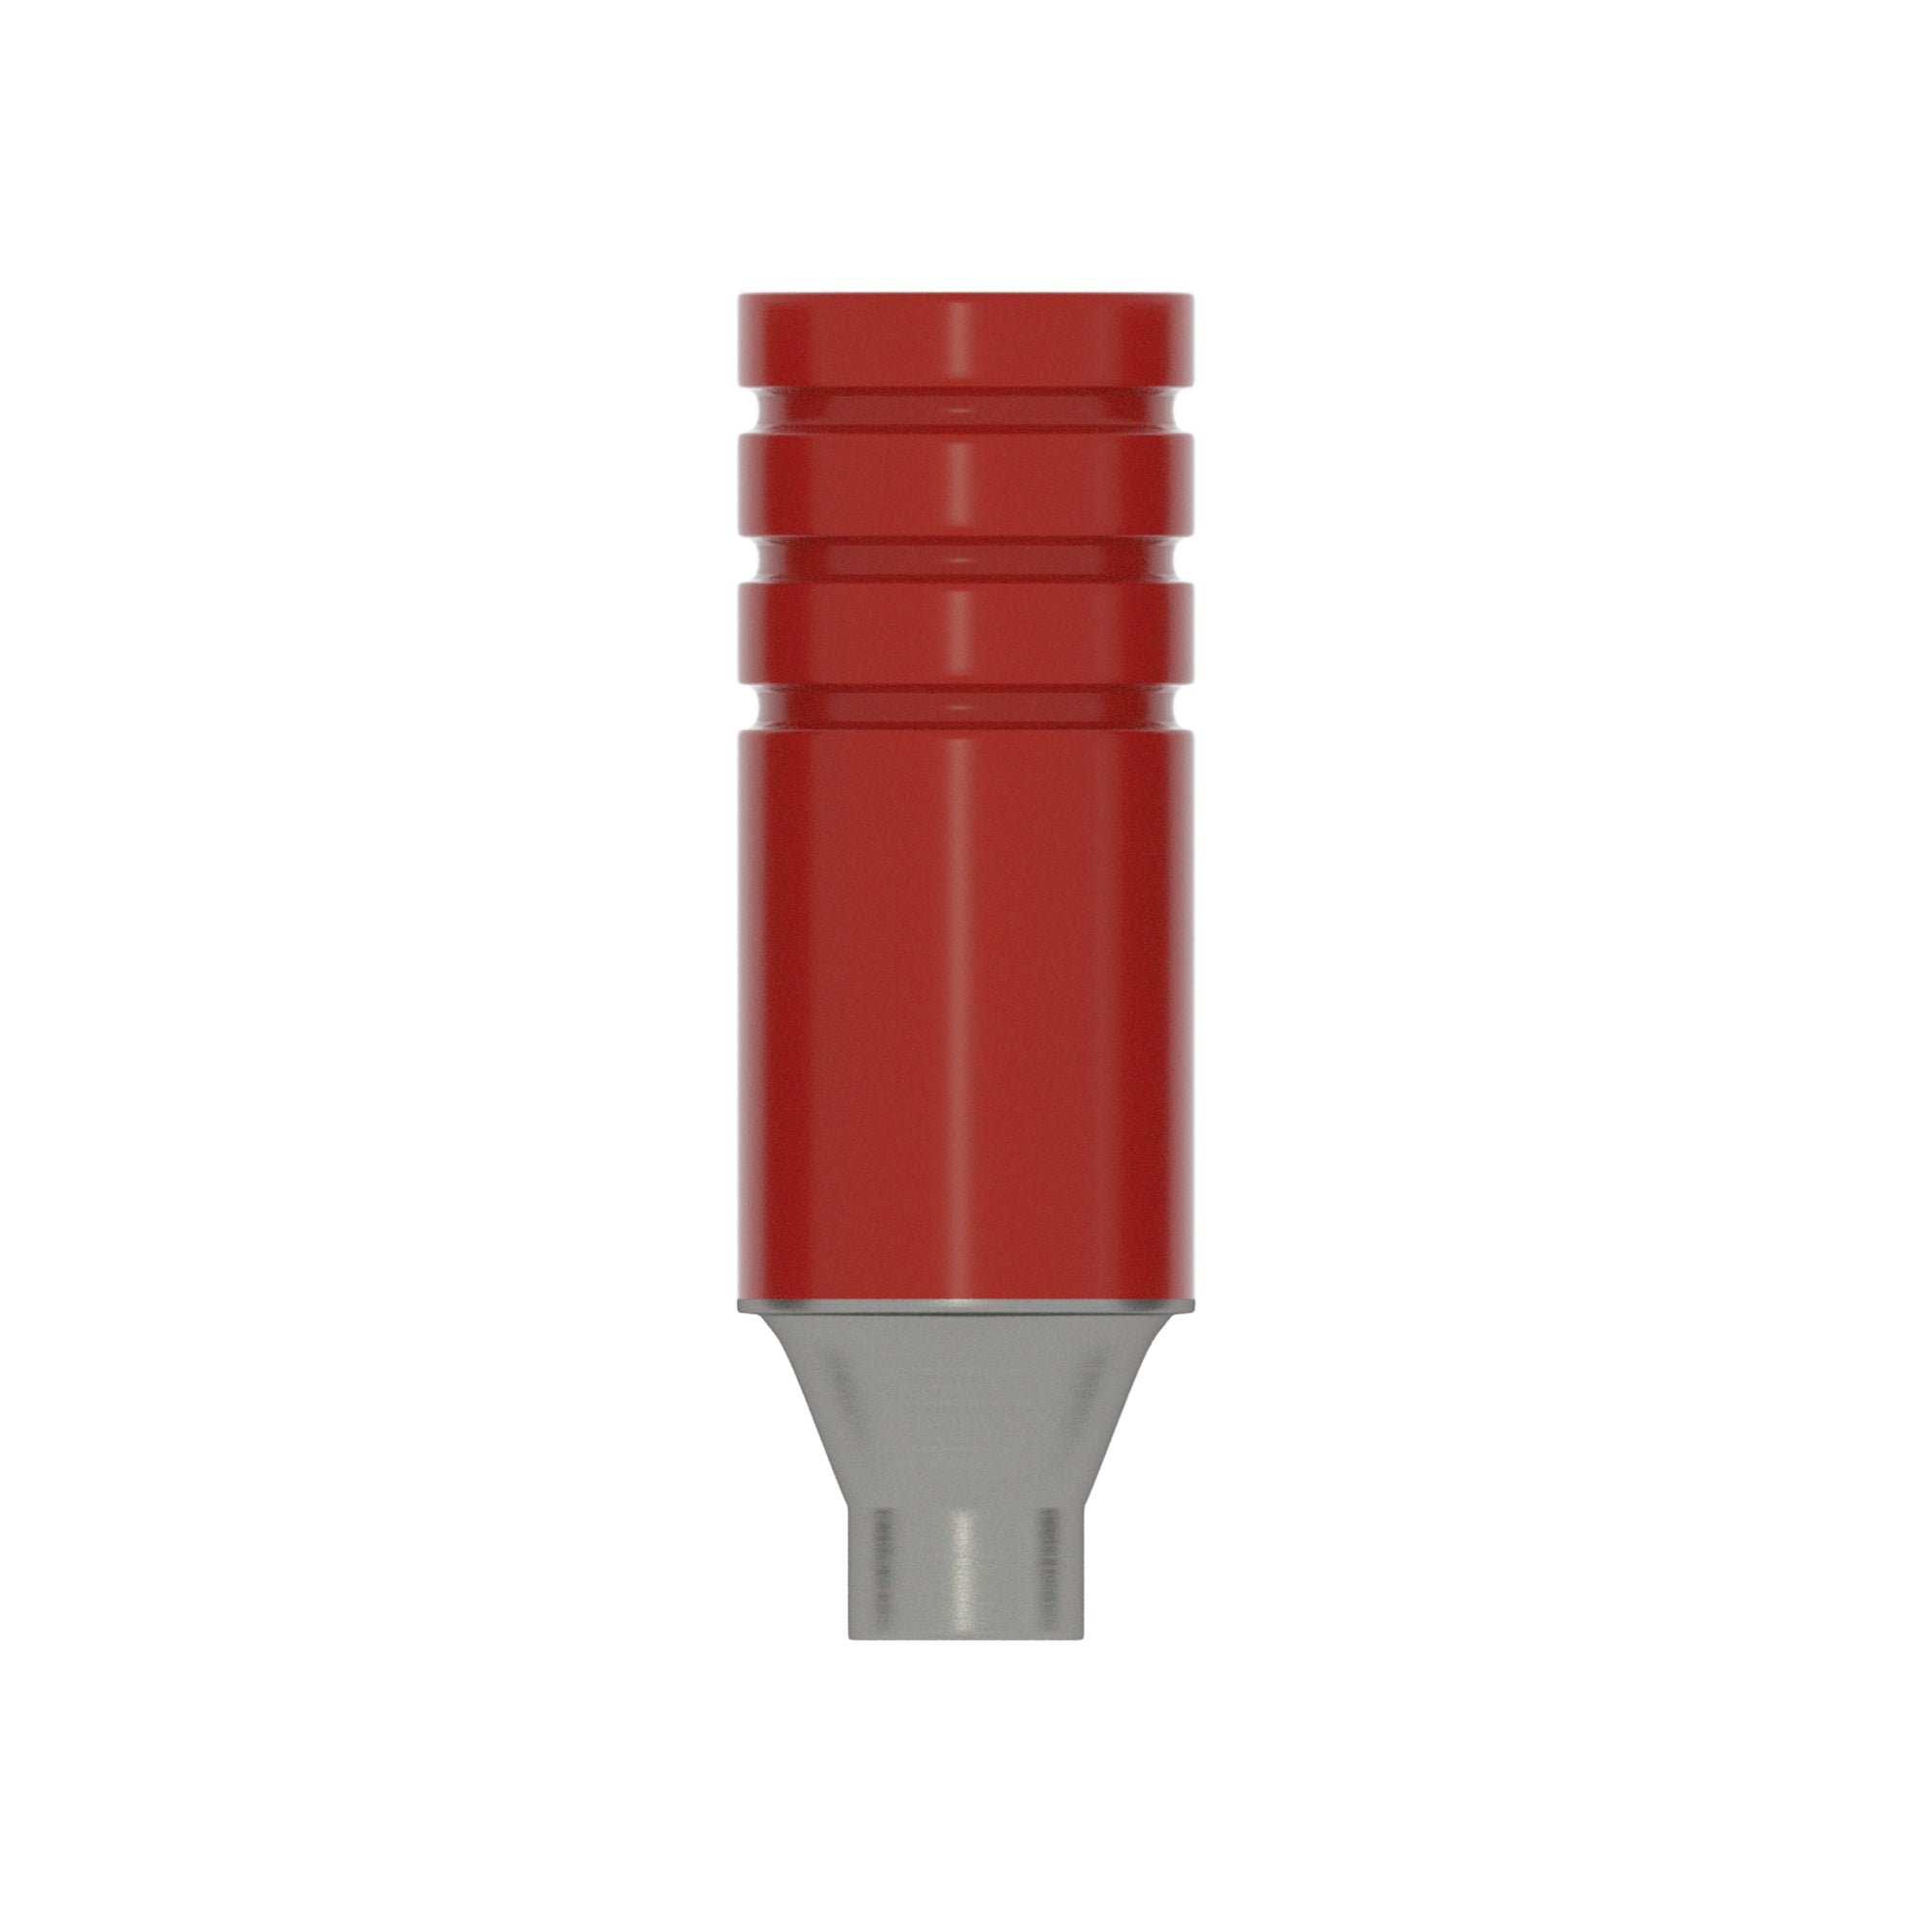 DSI Straight Castable CoCr Abutment Rotational (UCLA) 4.5mm -Conical Connection NP Ø3.5mm